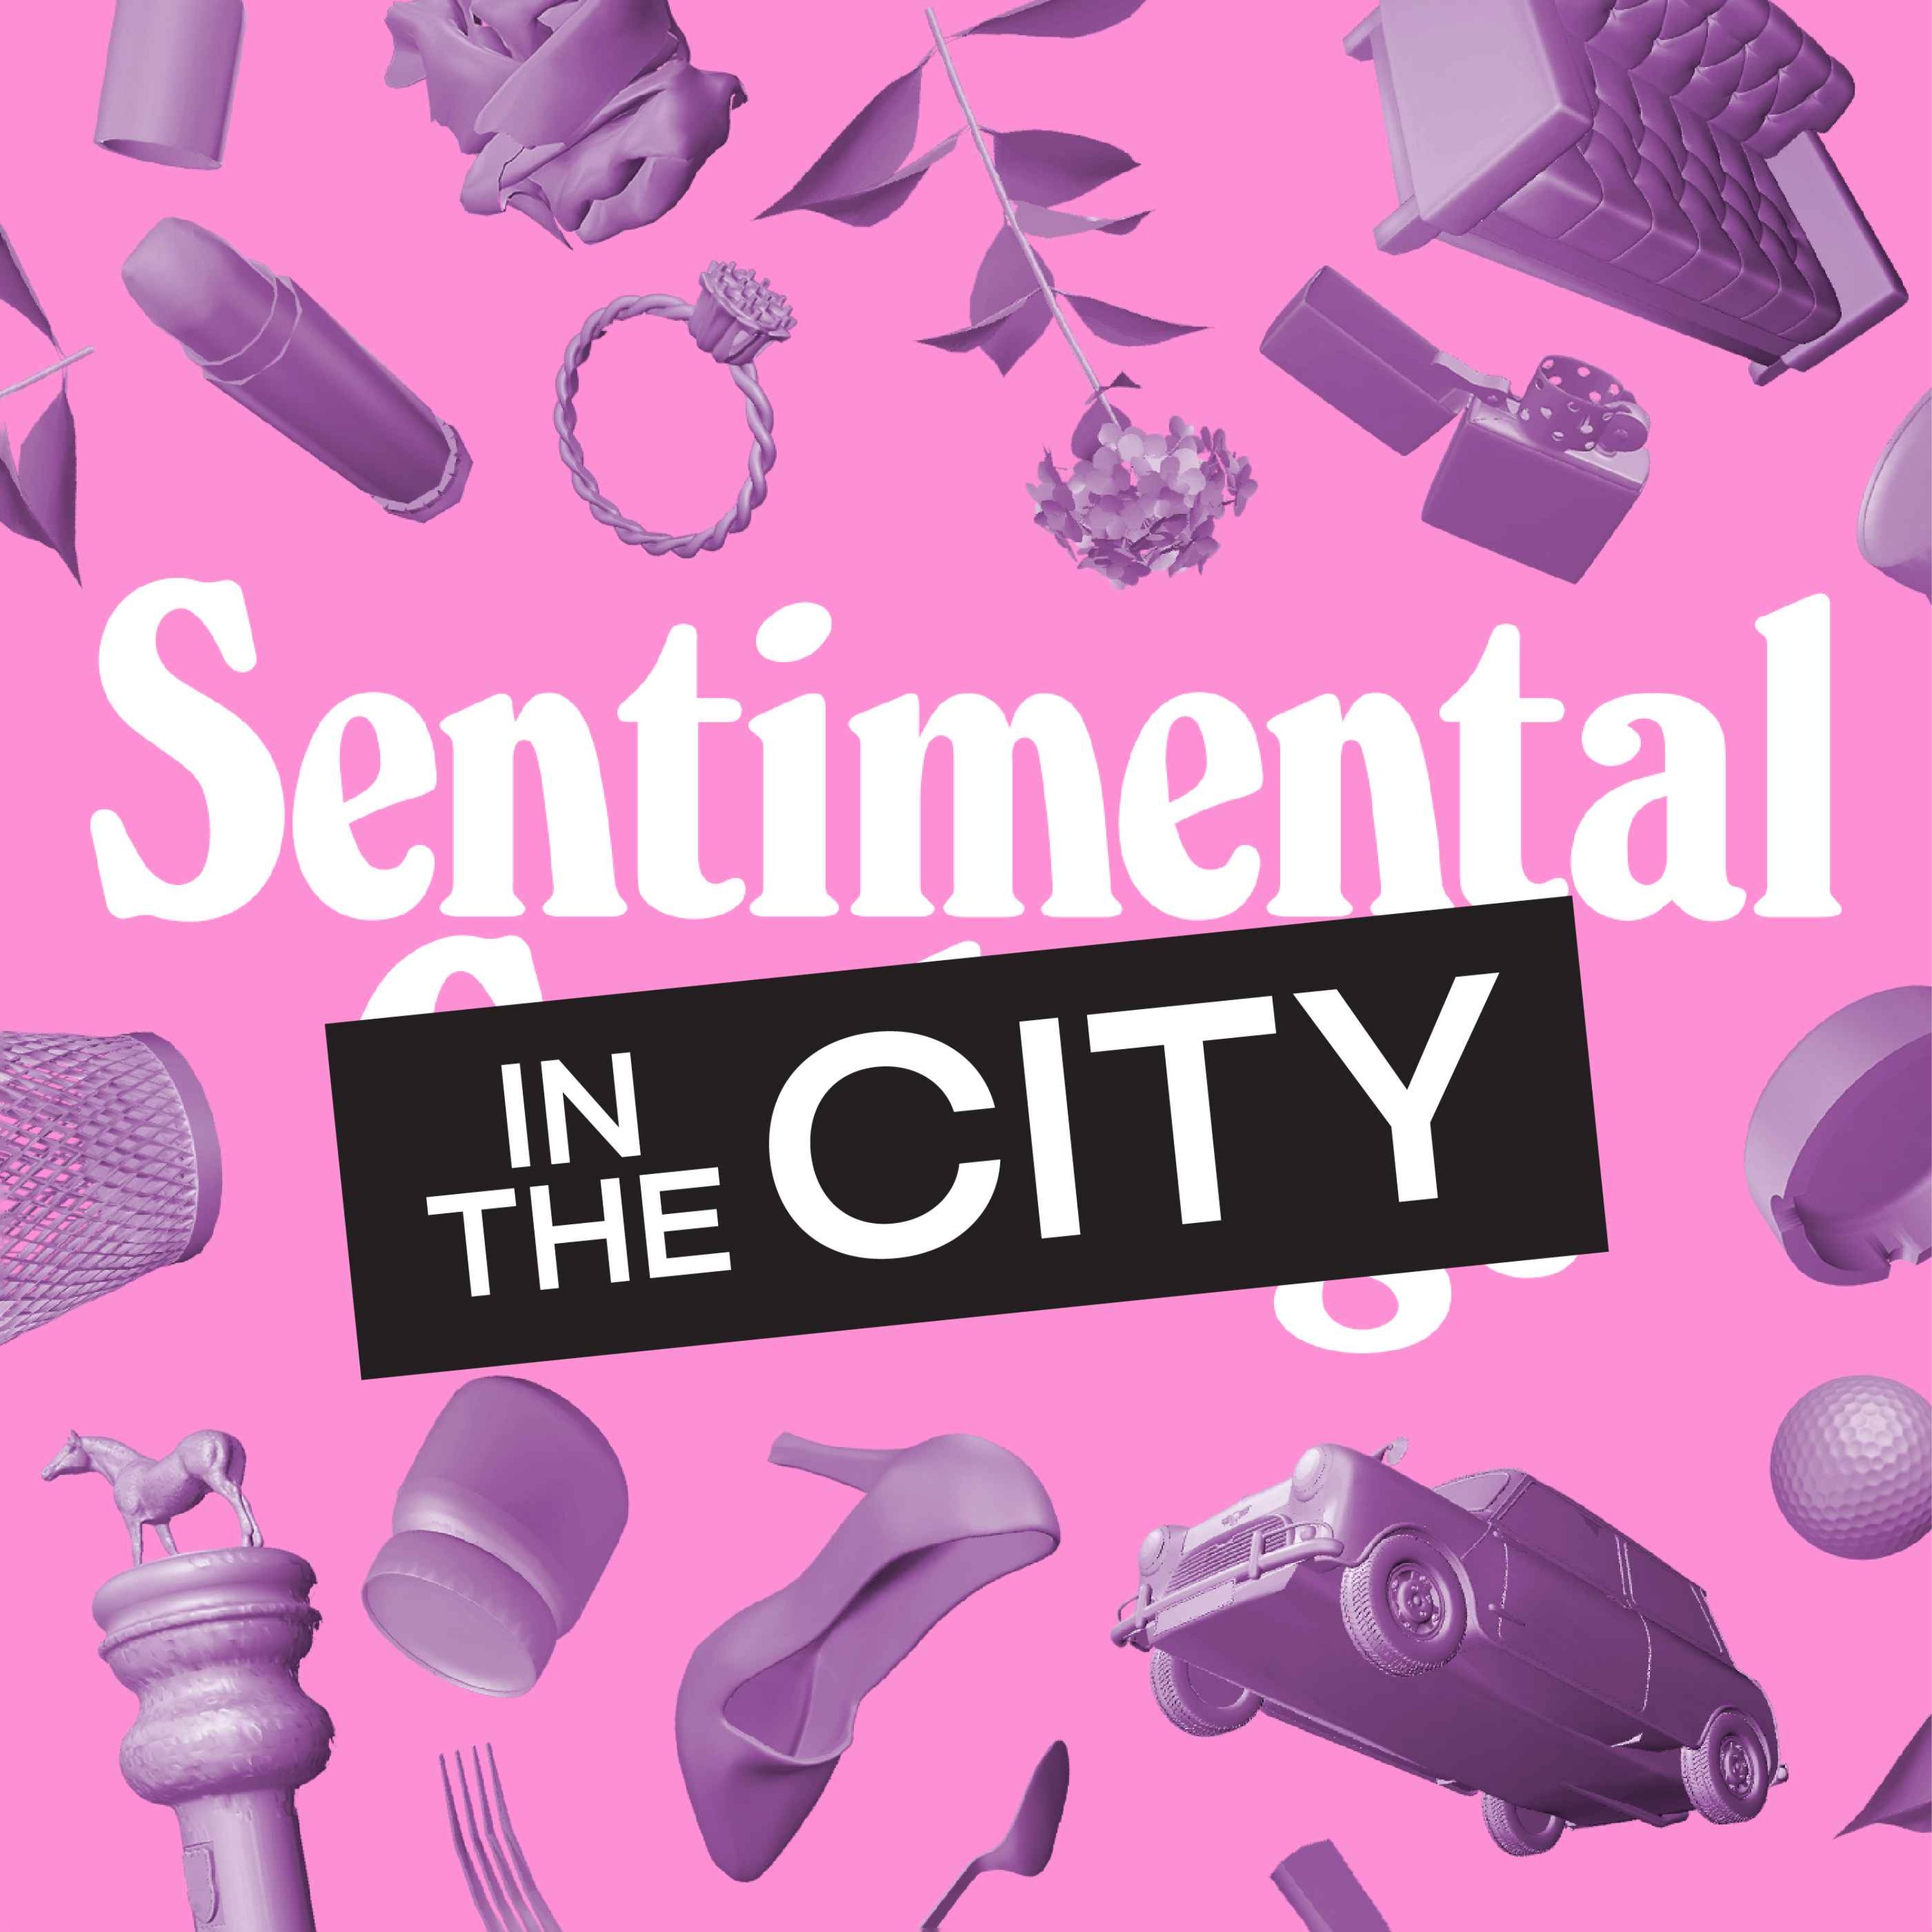 Sentimental in the City: And Just Like That, pt II